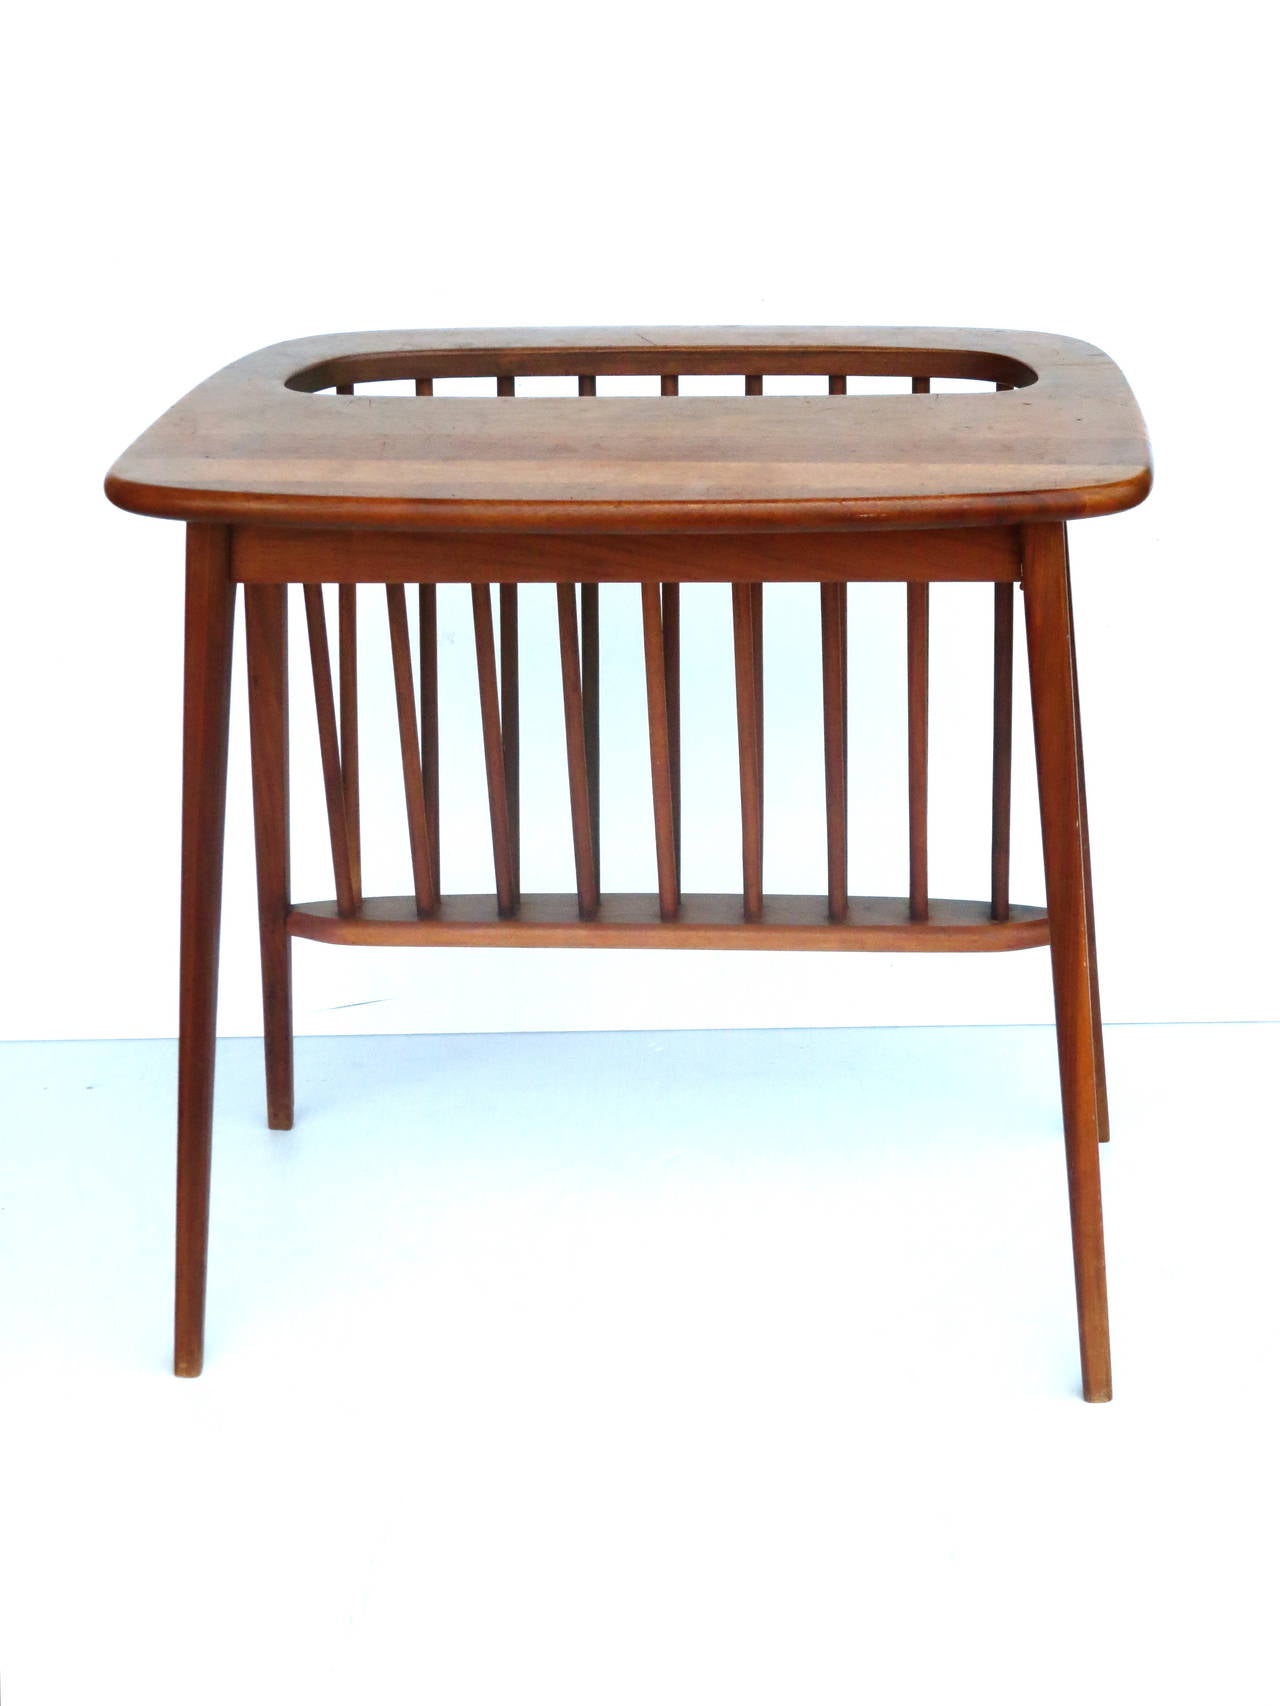 Stunning midcentury side table / magazine rack in solid walnut by Arthur Umanoff, circa 1950s. This beautiful and rare California design piece has been freshly refinished and is solid and sturdy. Great complimentary piece to any MCM room!